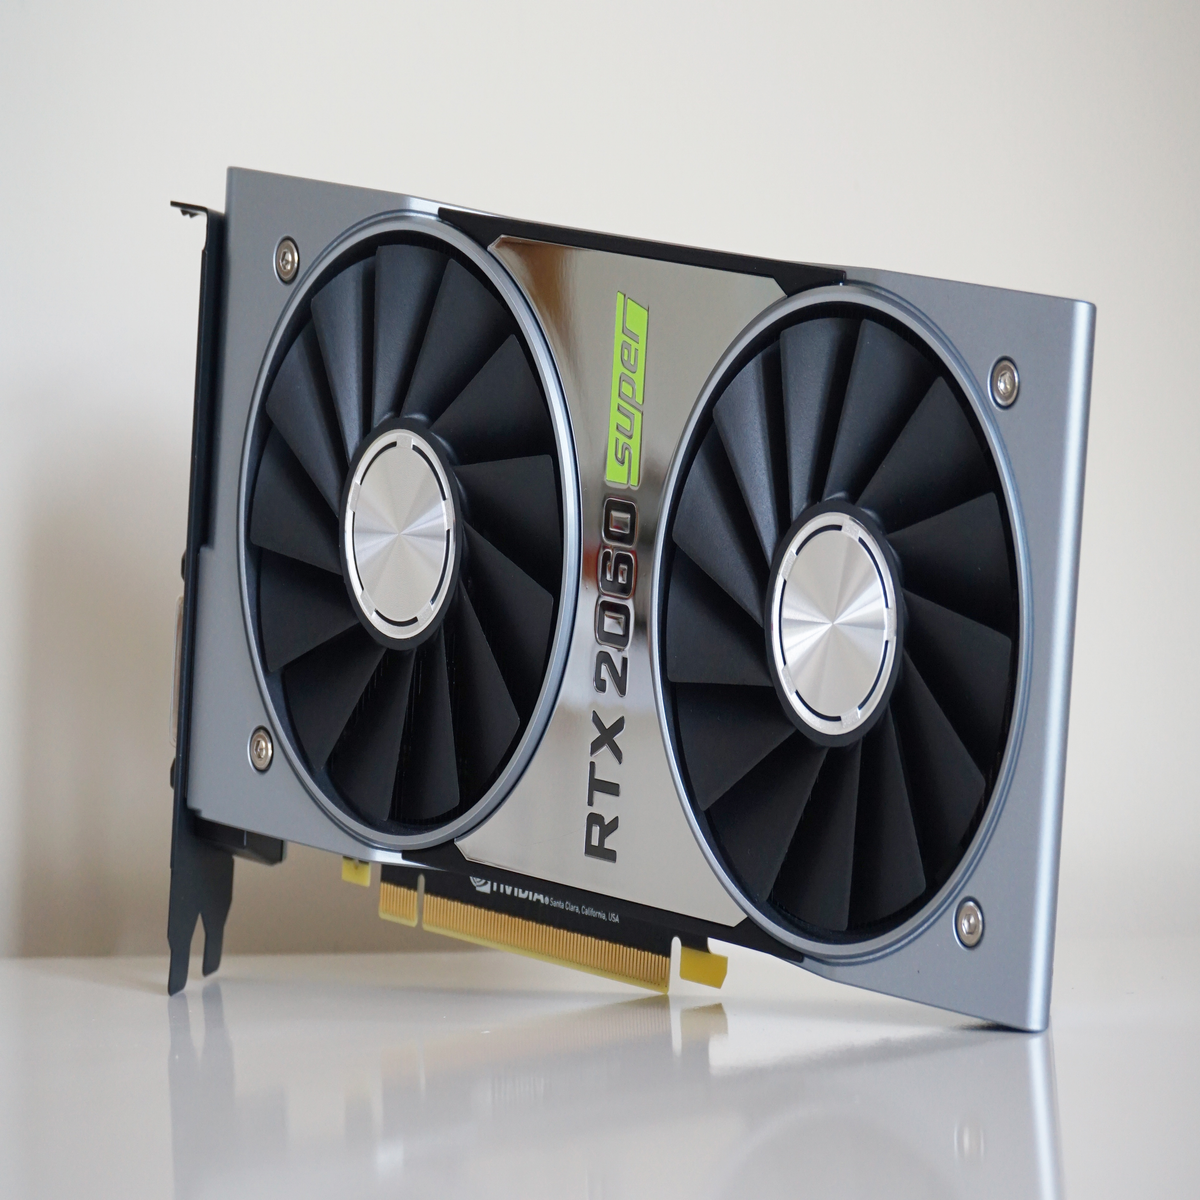 Nvidia GeForce RTX 2060 Super review: RTX 2070 power on the cheap